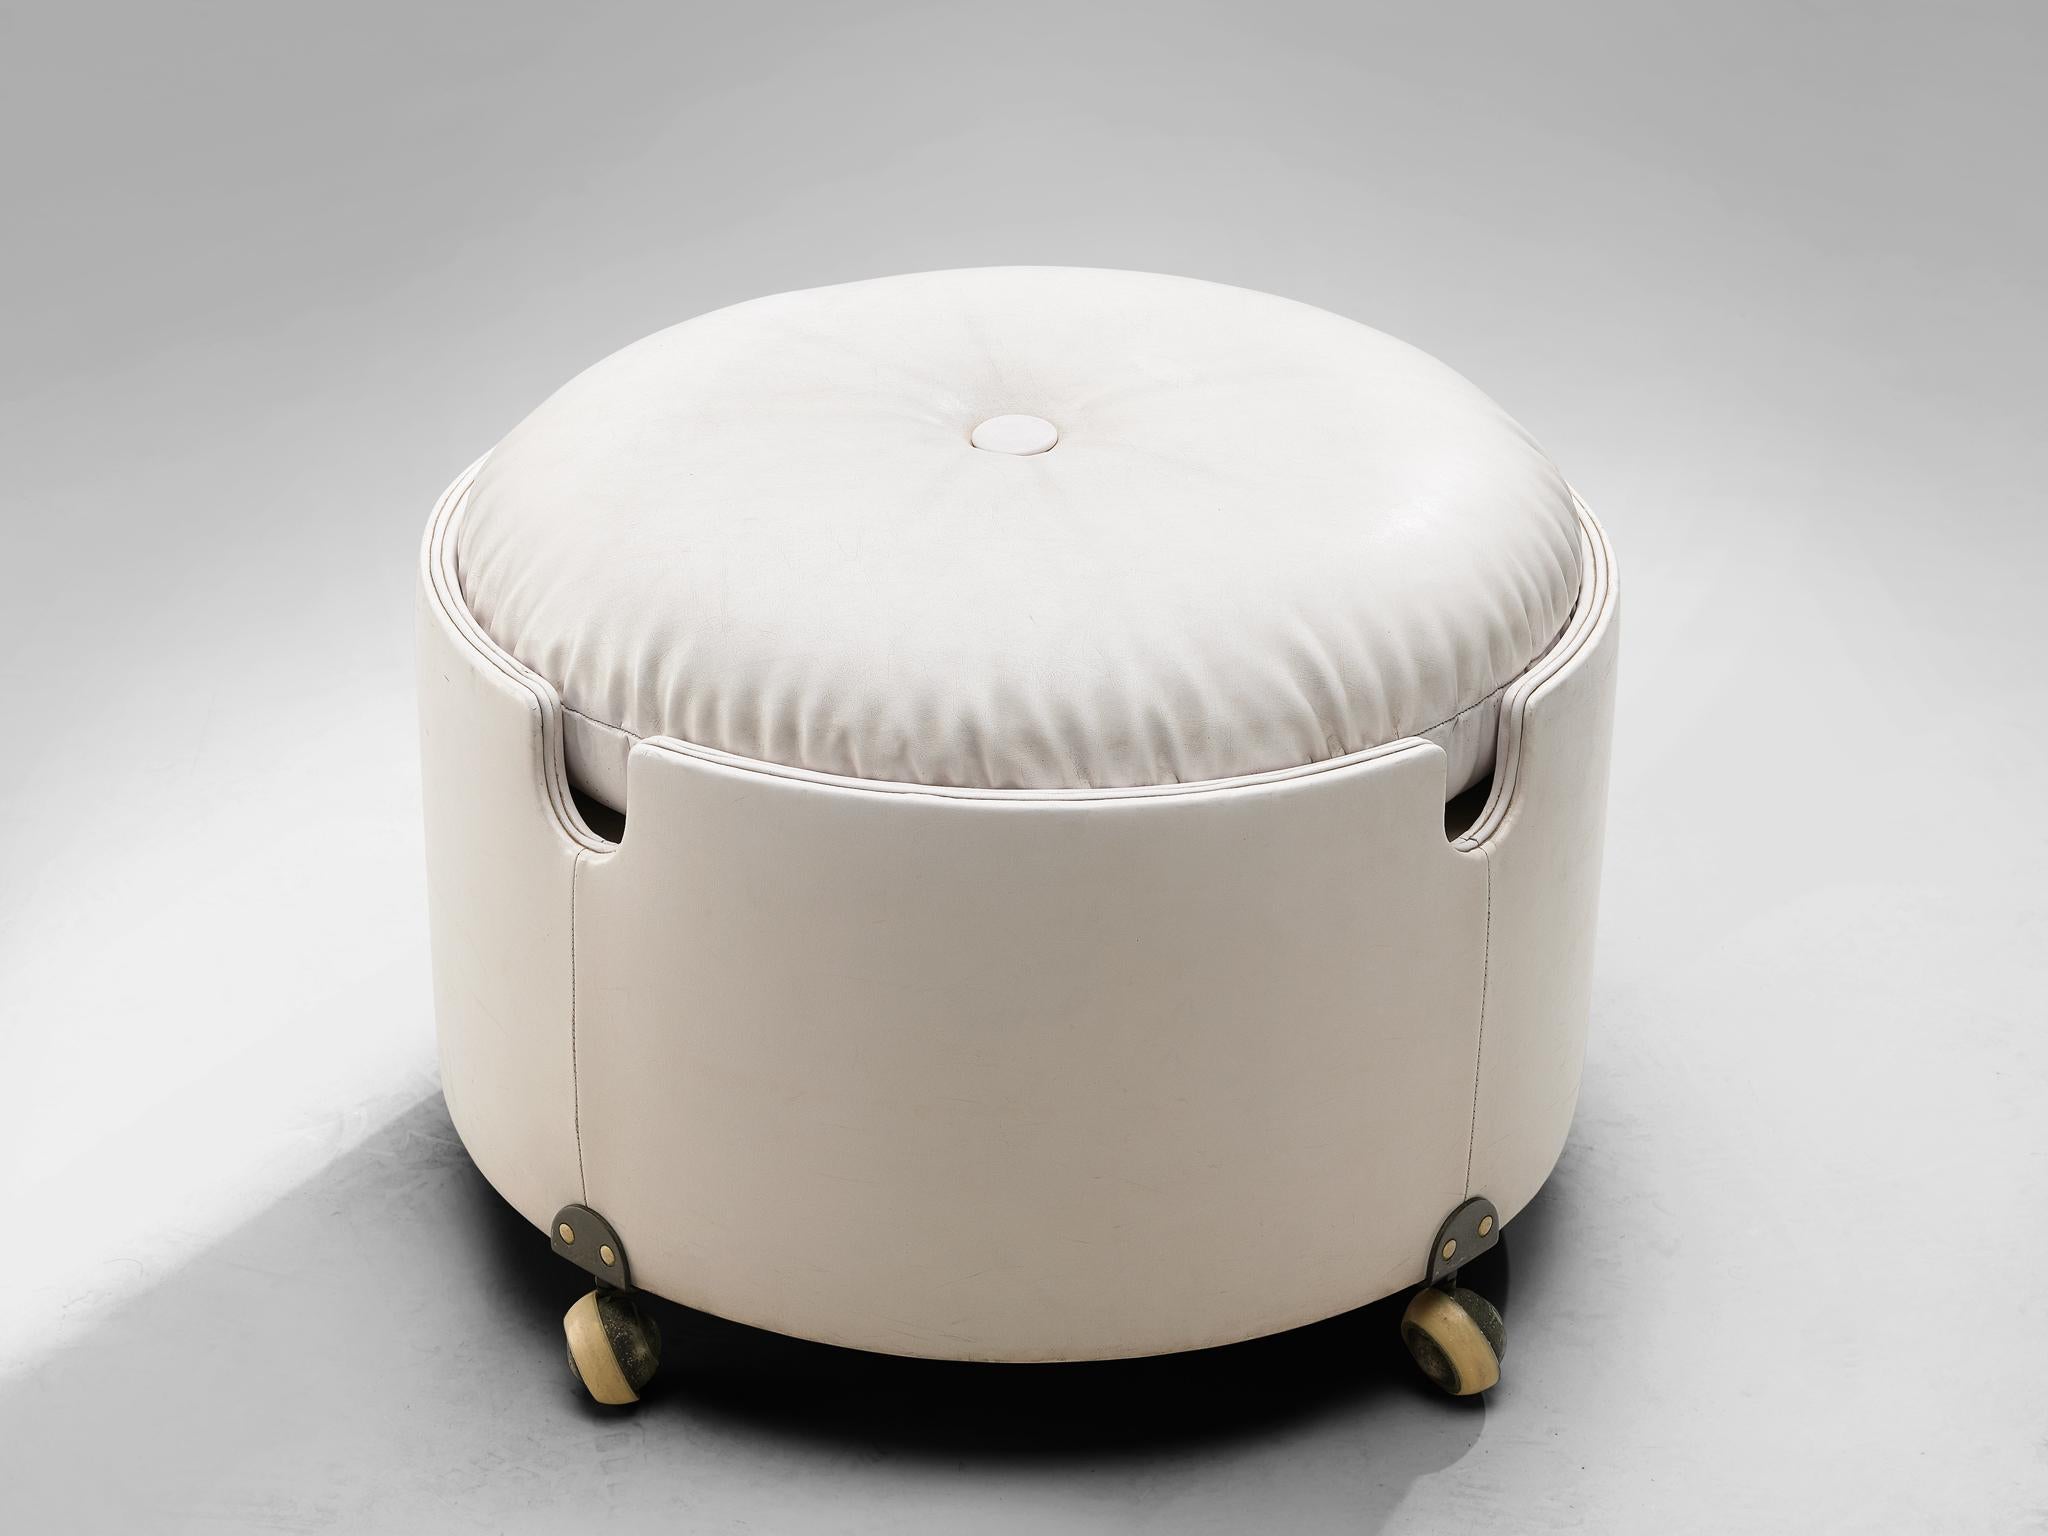 Luigi Massoni for Poltrona Frau, pouf on wheels, leather, plywood, Italy, 1968.

This pouf designed by Luigi Massoni for Poltrona Frau and is part of the Dilly Dally series. The pouf is made out of curved and padded plywood covered with leather and